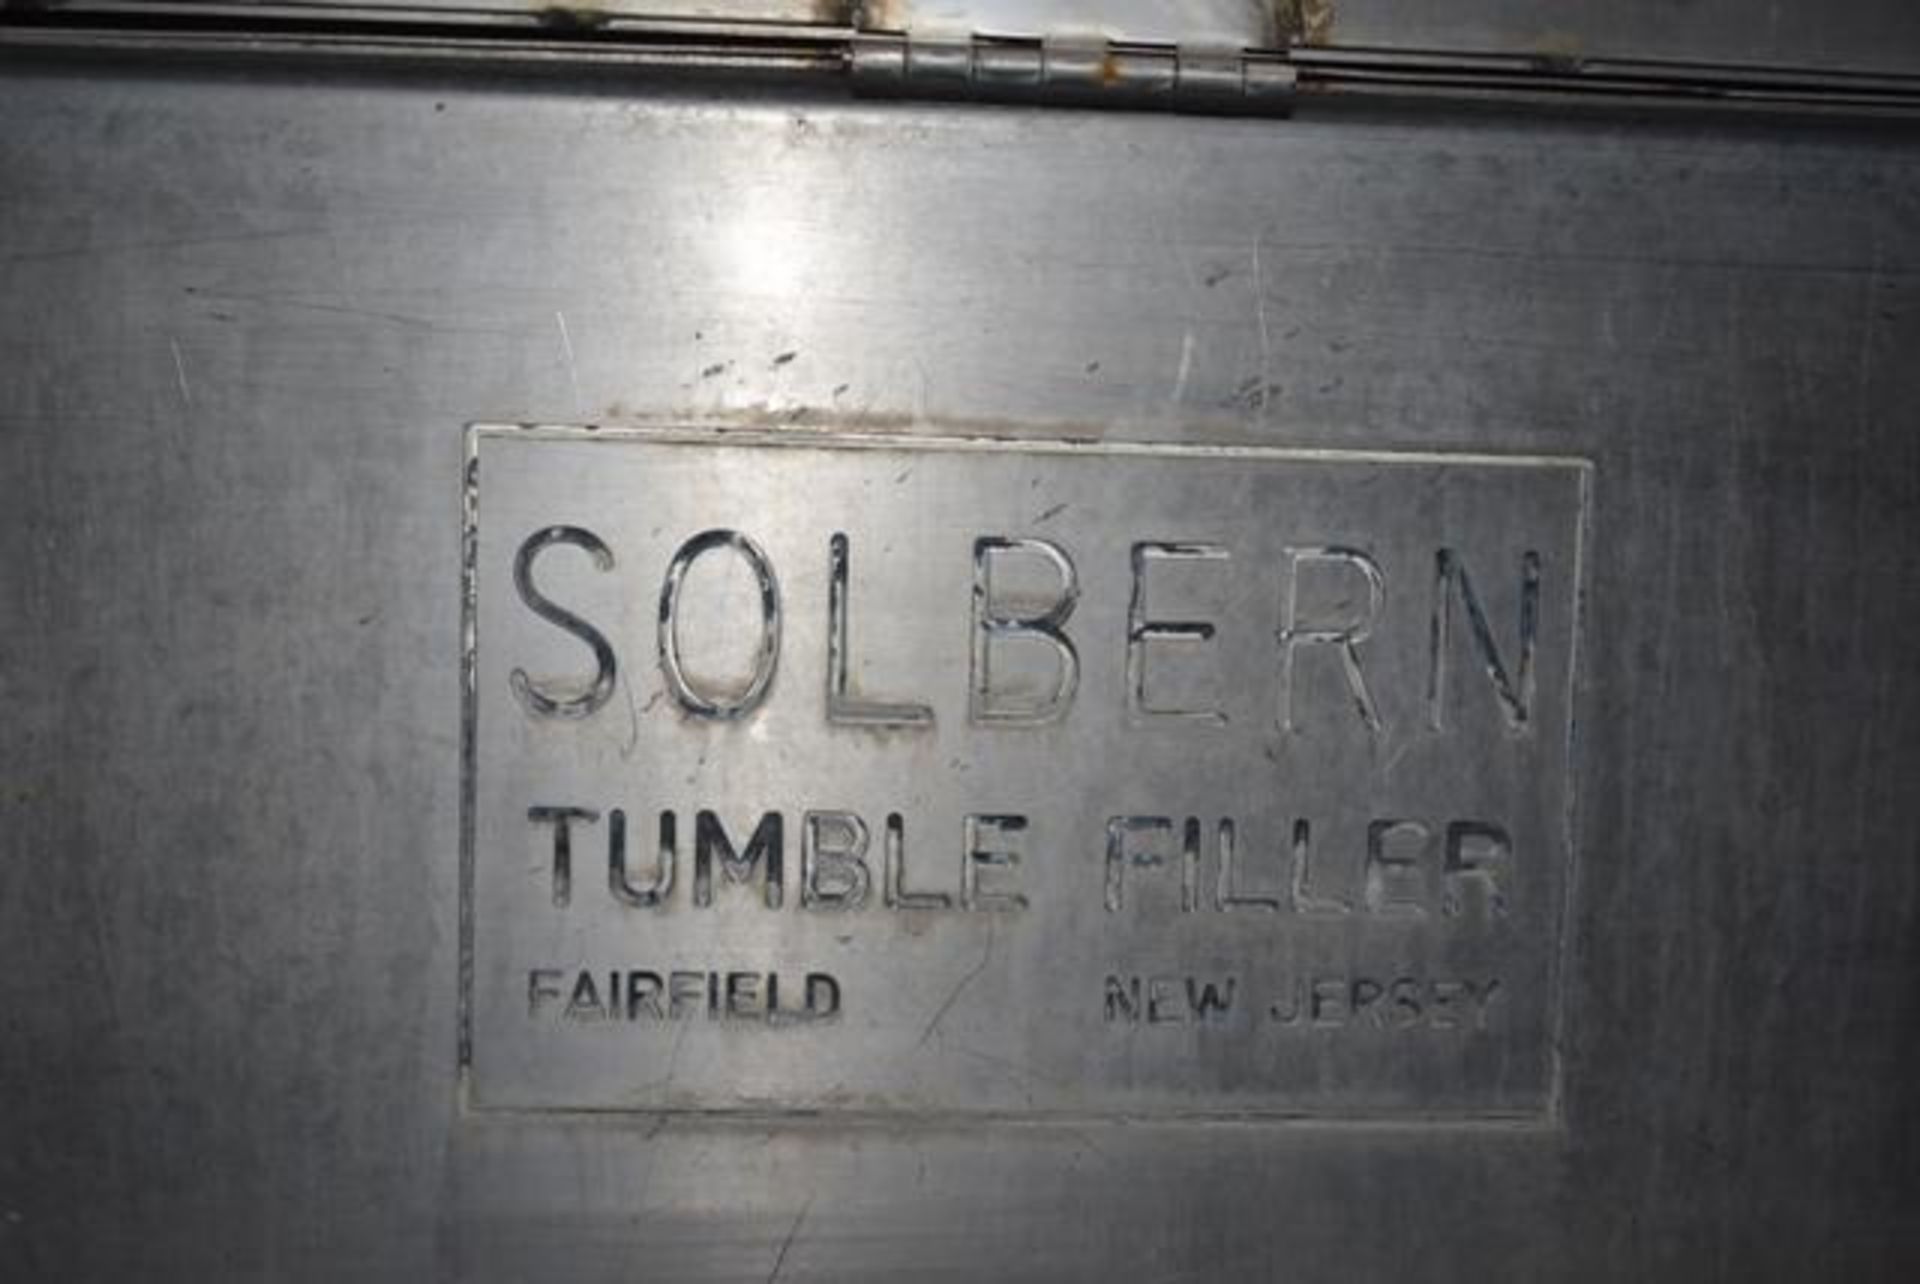 LOT 1448: Solbern Tumble Filler, Size 401 x 411 Can, Line CG, RIGGING FEE $750 - Image 2 of 4